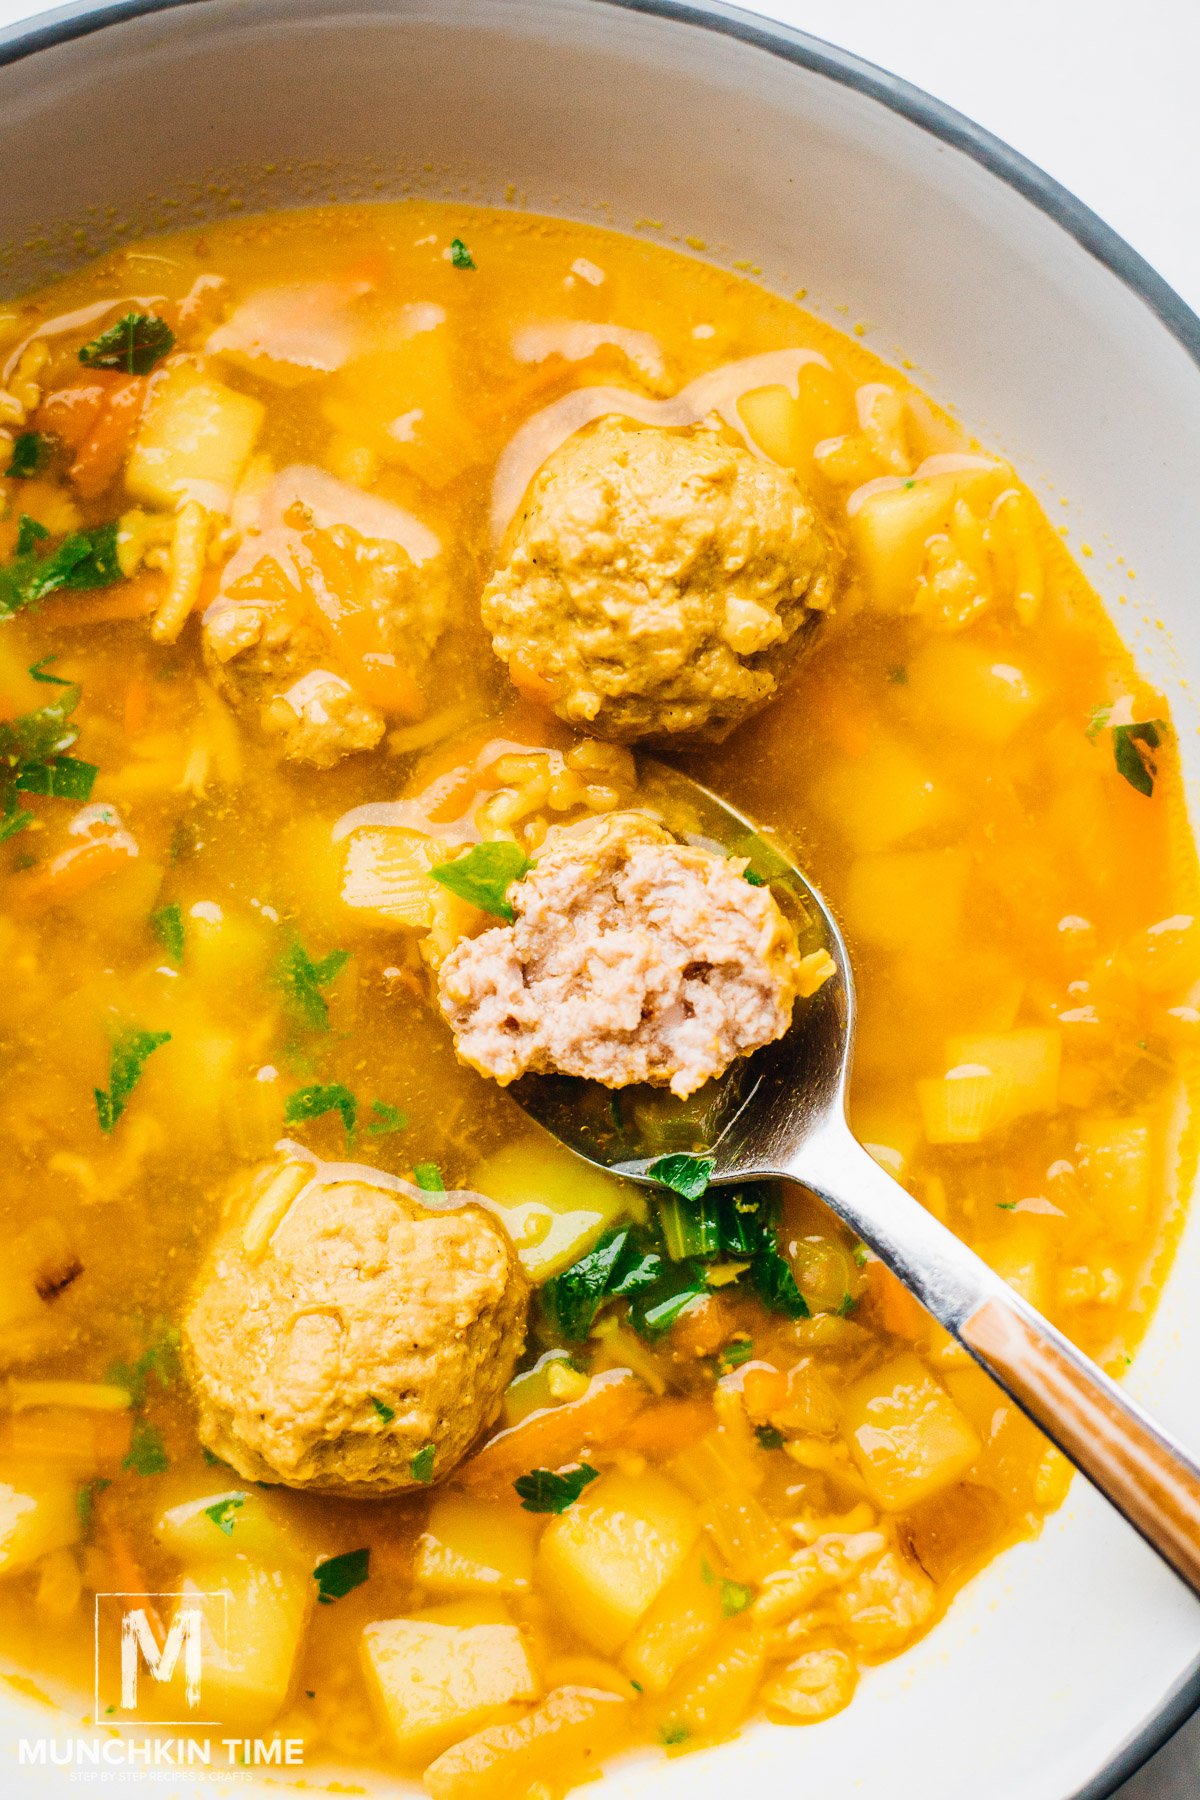 Chicken Meatball Soup Recipe with Rice